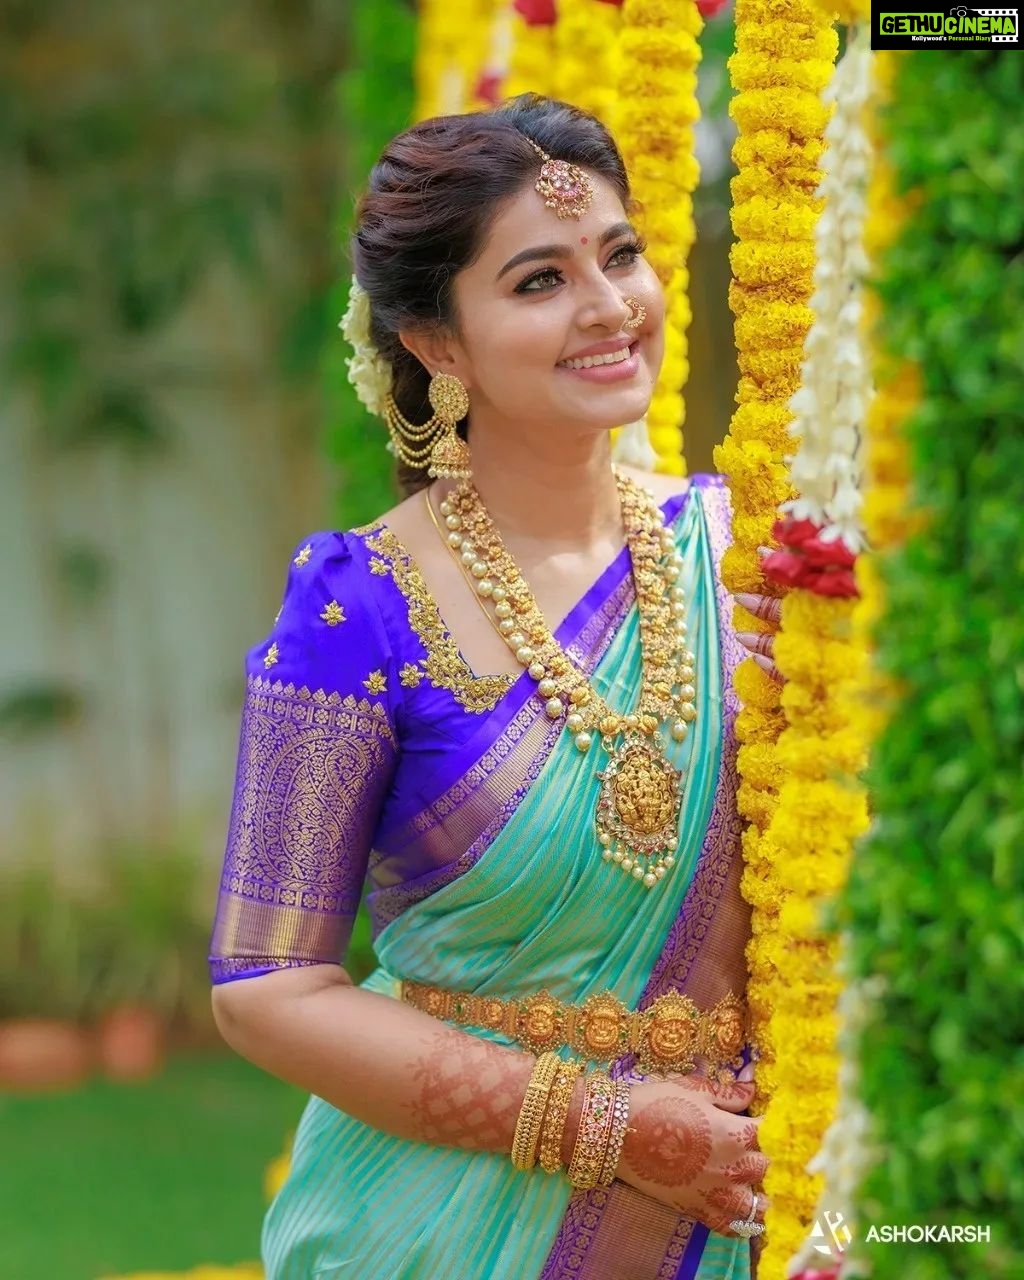 Actress Sneha HD Photos and Wallpapers August 2022 - Gethu Cinema